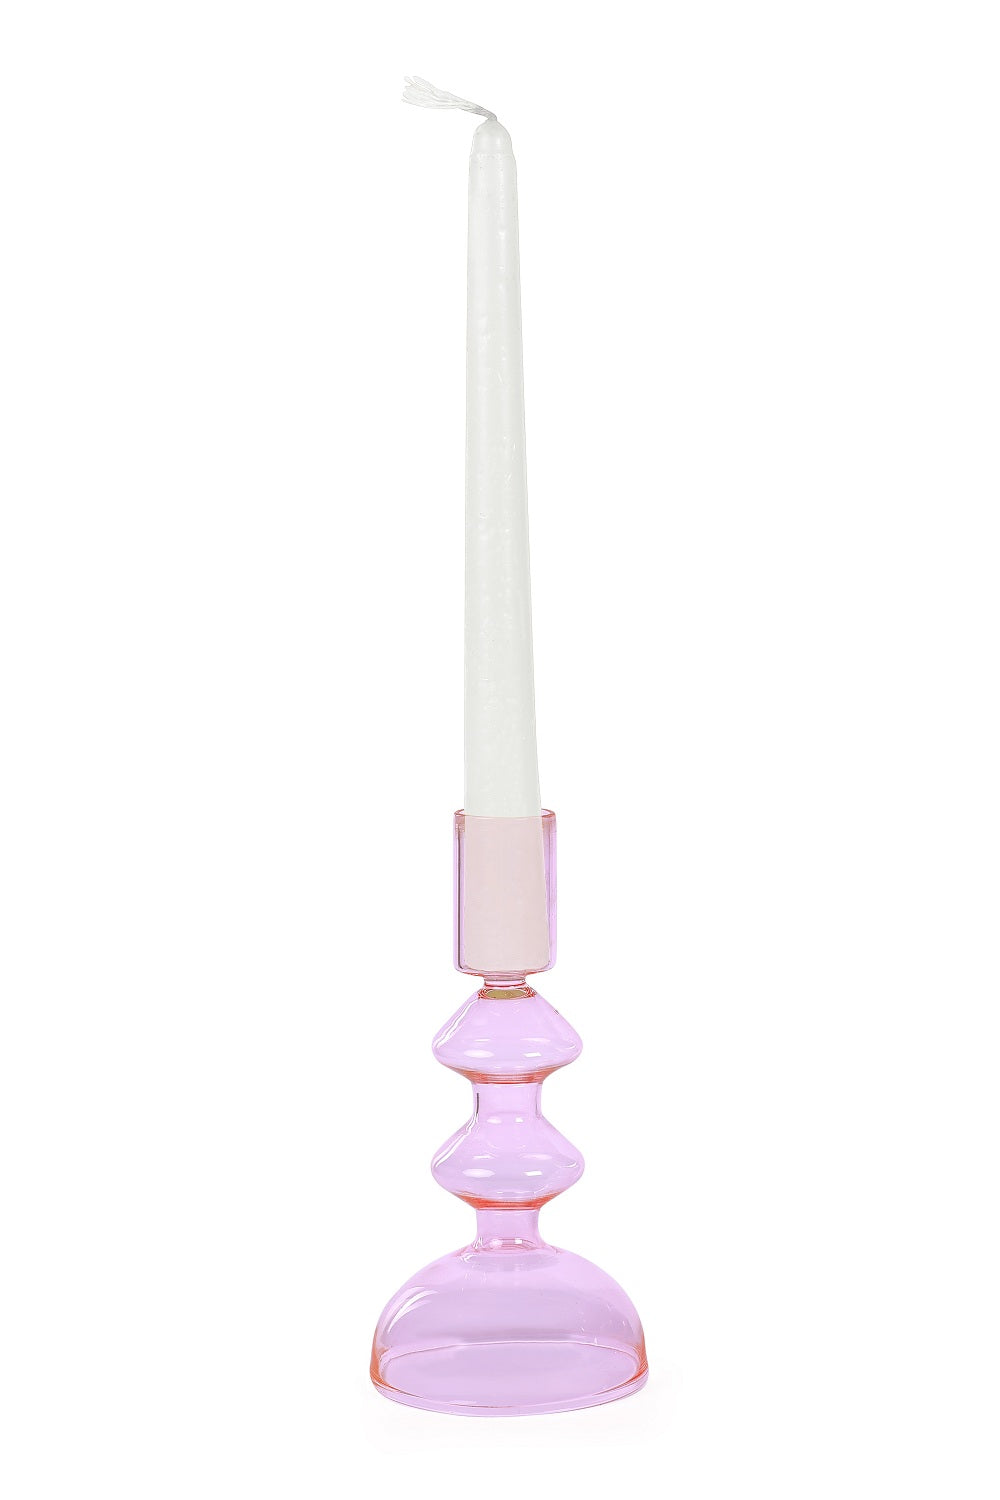 Retro Glass Candle Stick Holder- 6 x 2.5 Inches_ Pink (Set of 4)